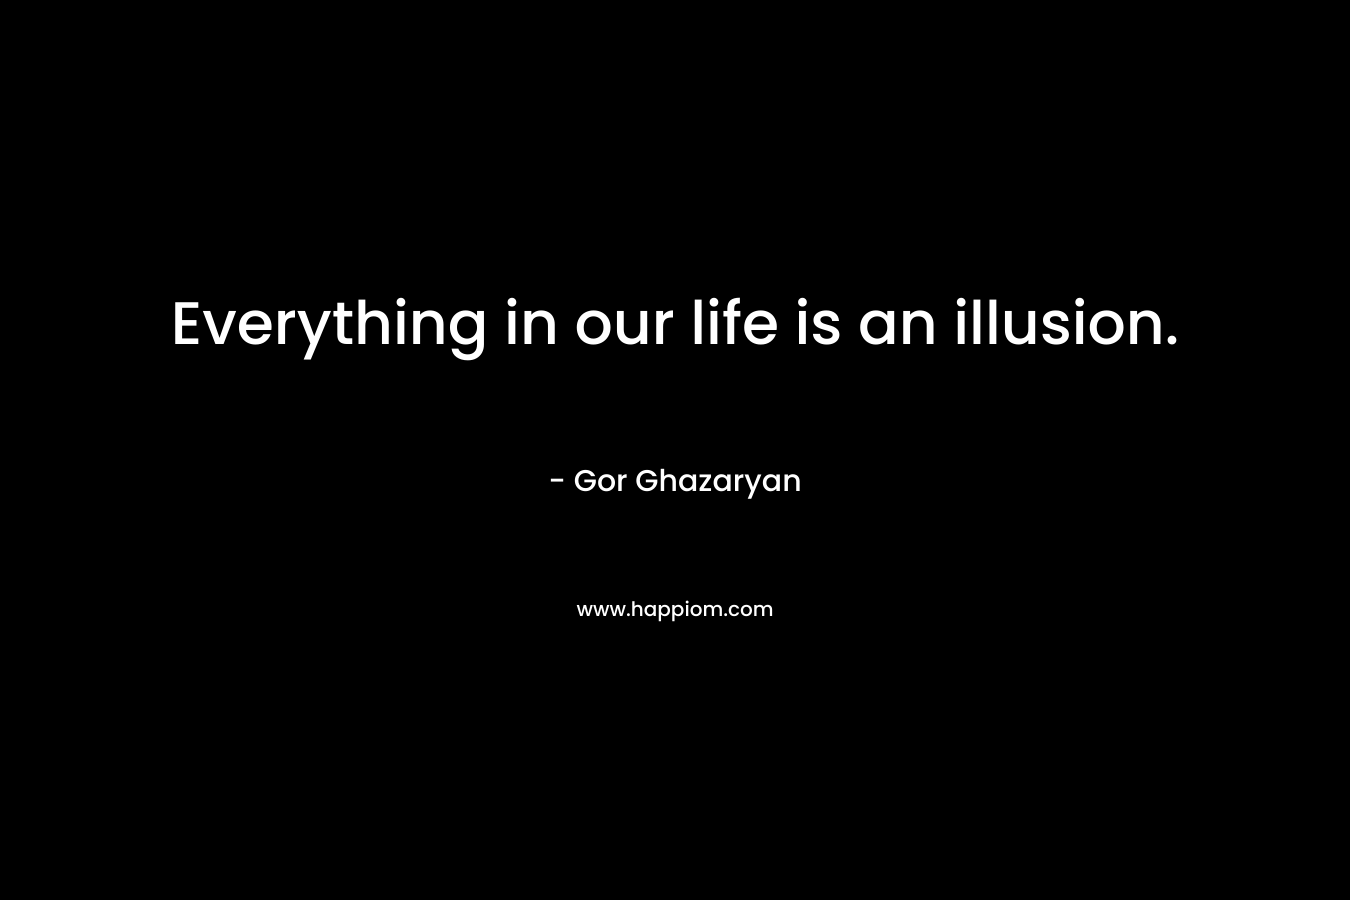 Everything in our life is an illusion. – Gor Ghazaryan